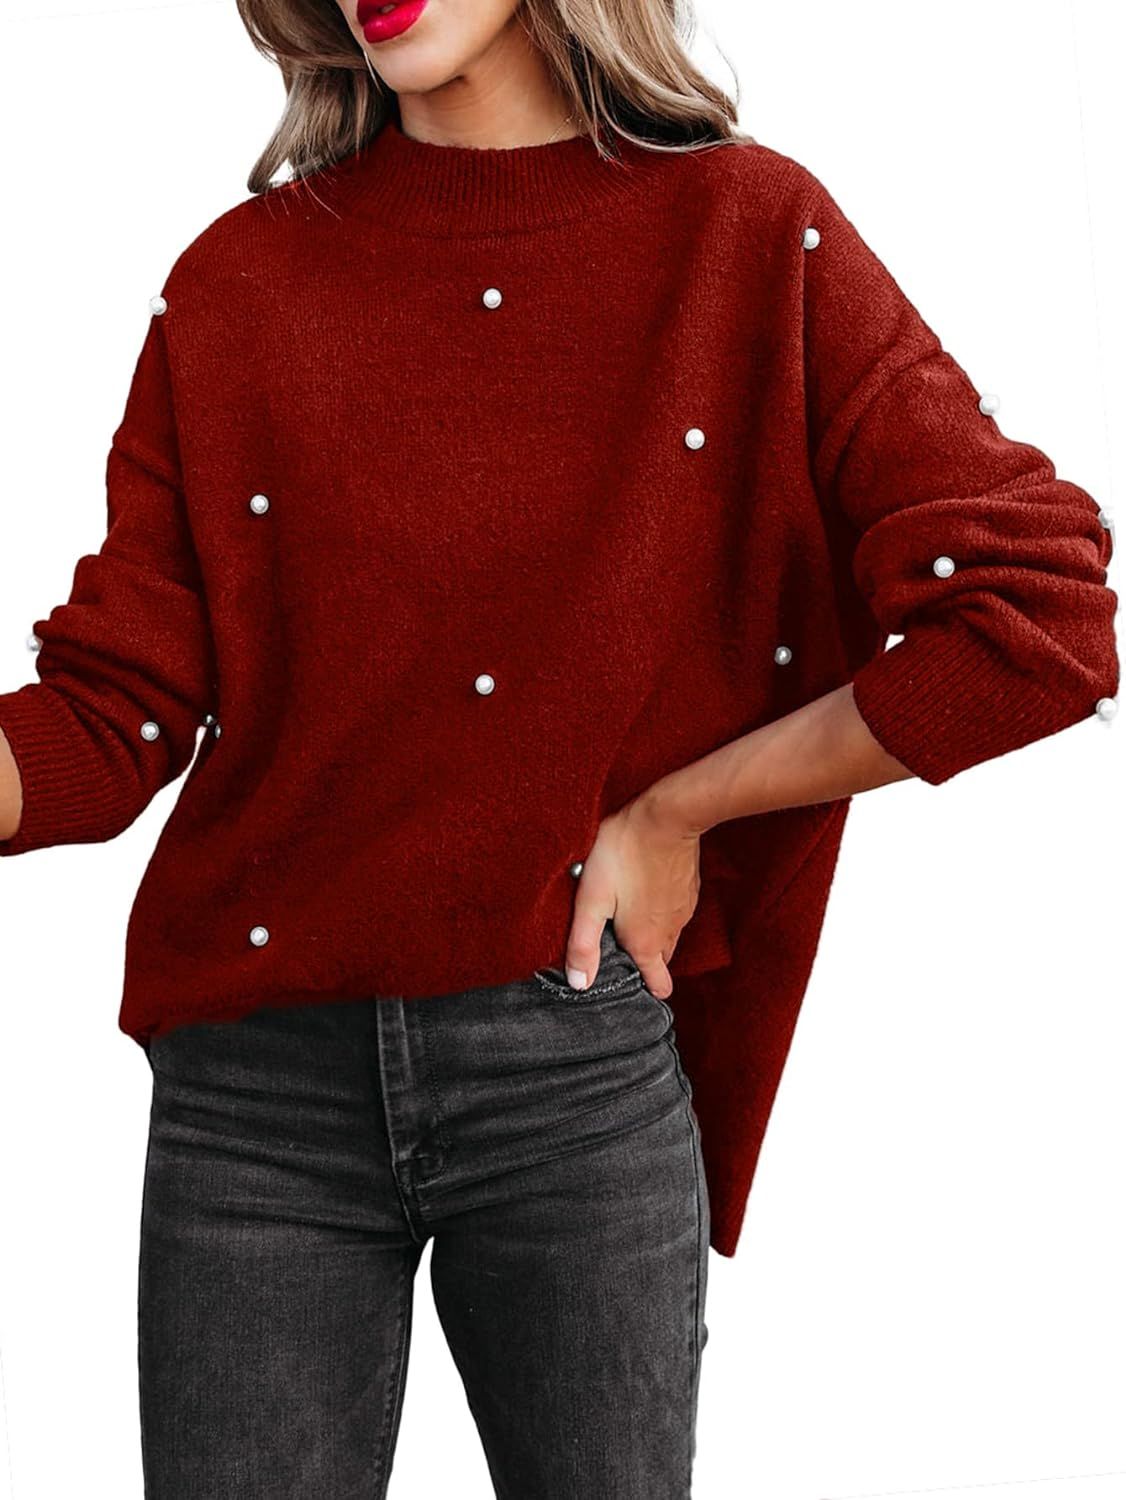 Glamaker Oversized Sweater for Women Cozy Batwing Sleeve Pearls Sweater Pullover Warm Mock Turtle... | Amazon (US)